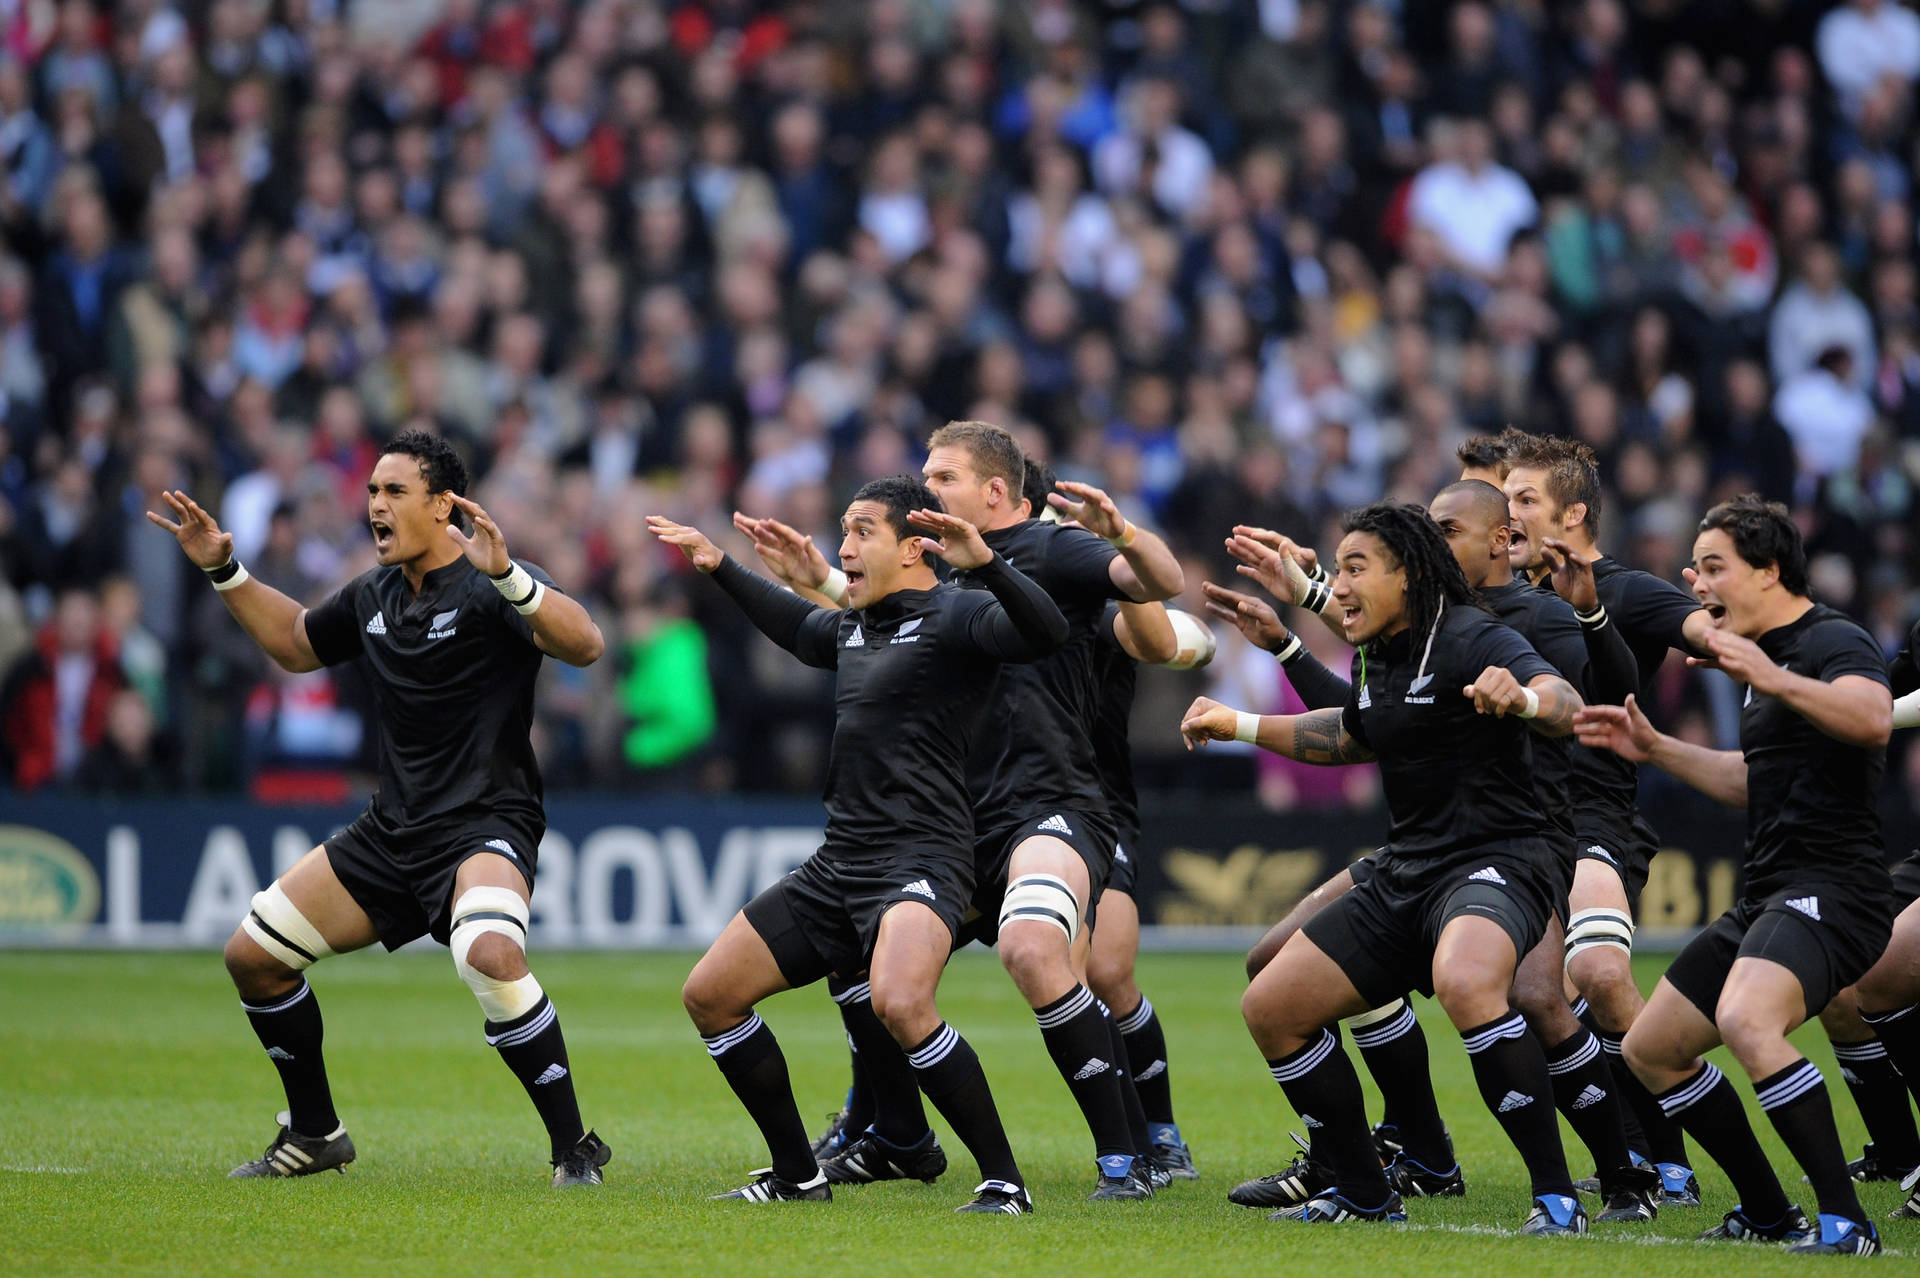 A Powerful Moment With The All Blacks Nz Rugby Team Background